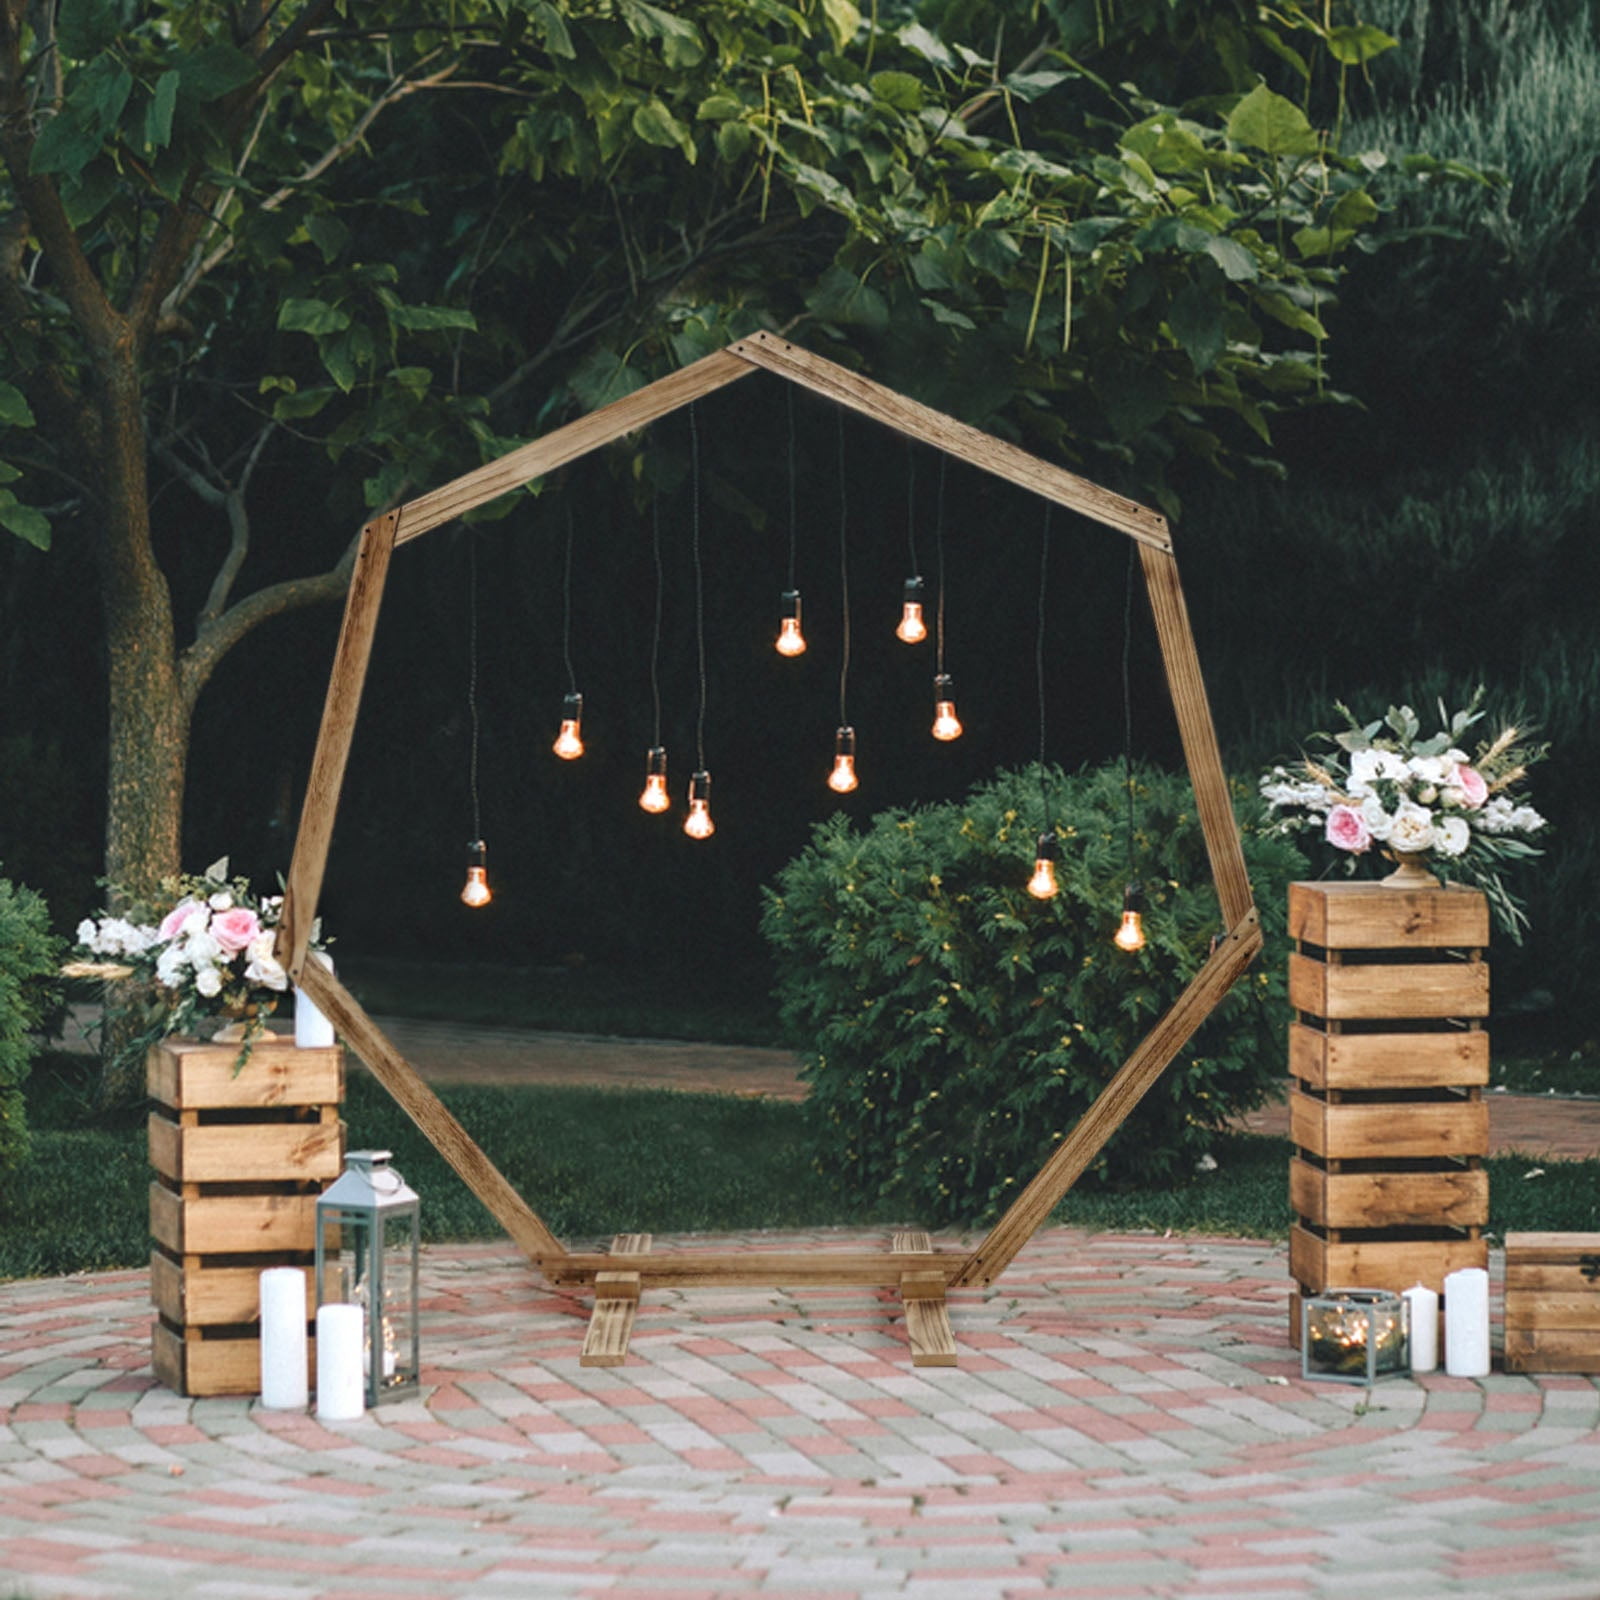 Efavormart 7ft Wooden Wedding Arch Heptagonal Wedding Arbor Photo Booth Backdrop Stand For